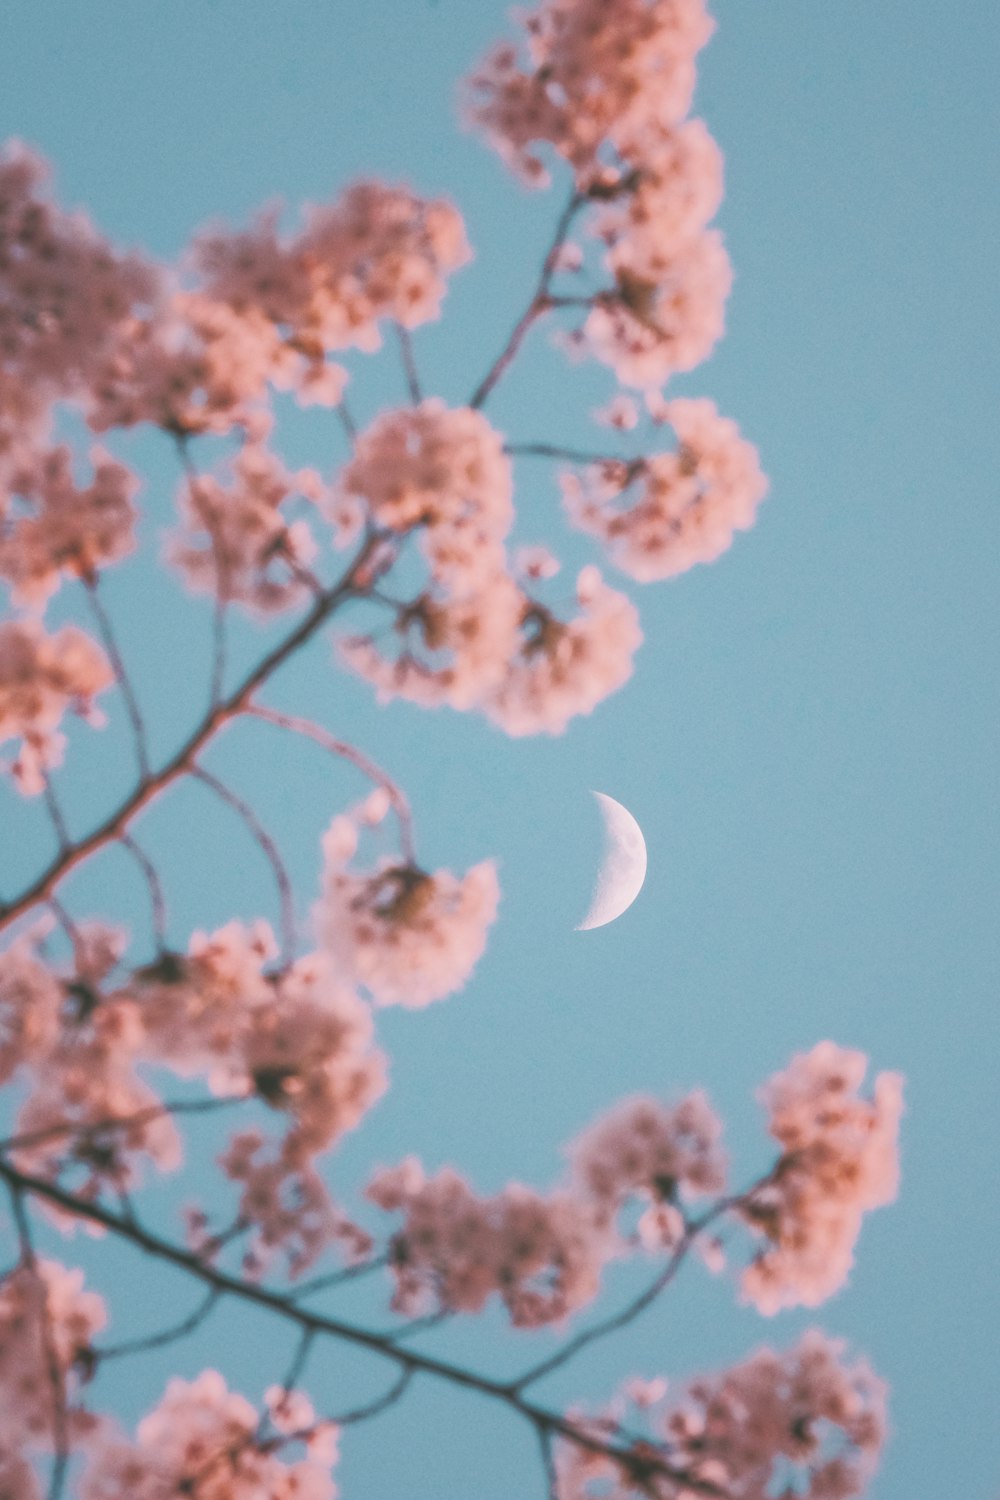 the moon is seen through the branches of a cherry blossom tree